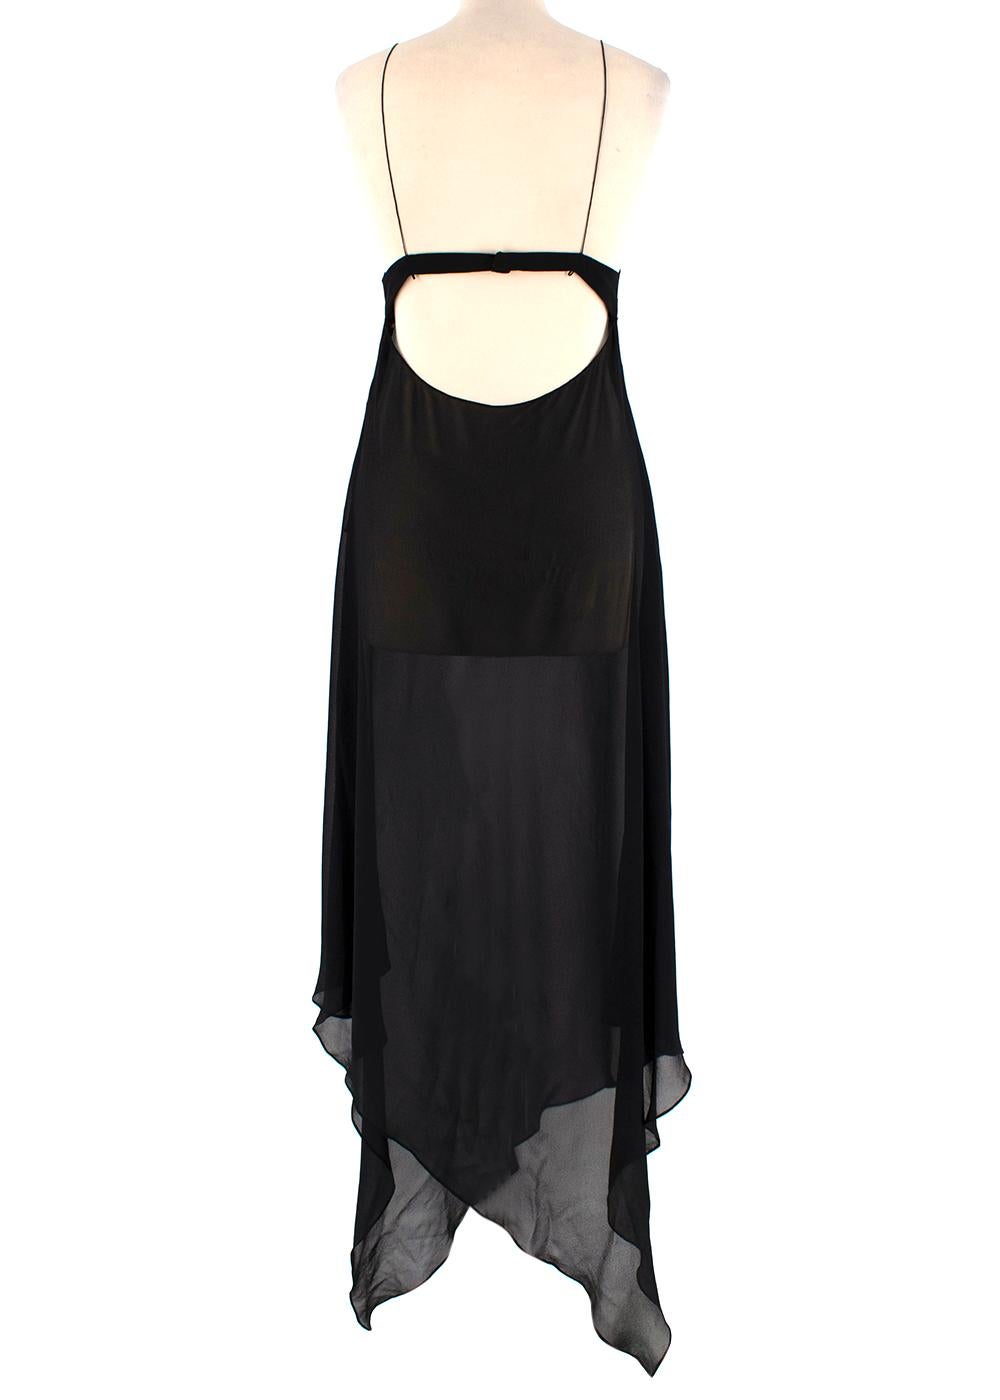 Saint Laurent Sheer Black Strappy Dress

- Deep V neck 
- Open Low Back 
- Lightweight And Flowing Silhouette 
- Handkerchief  Hem 
-  Hook and Clasp Fastening 

Material:
- 100% Silk

Made in France 
Measurements are taken with the item lying flat,